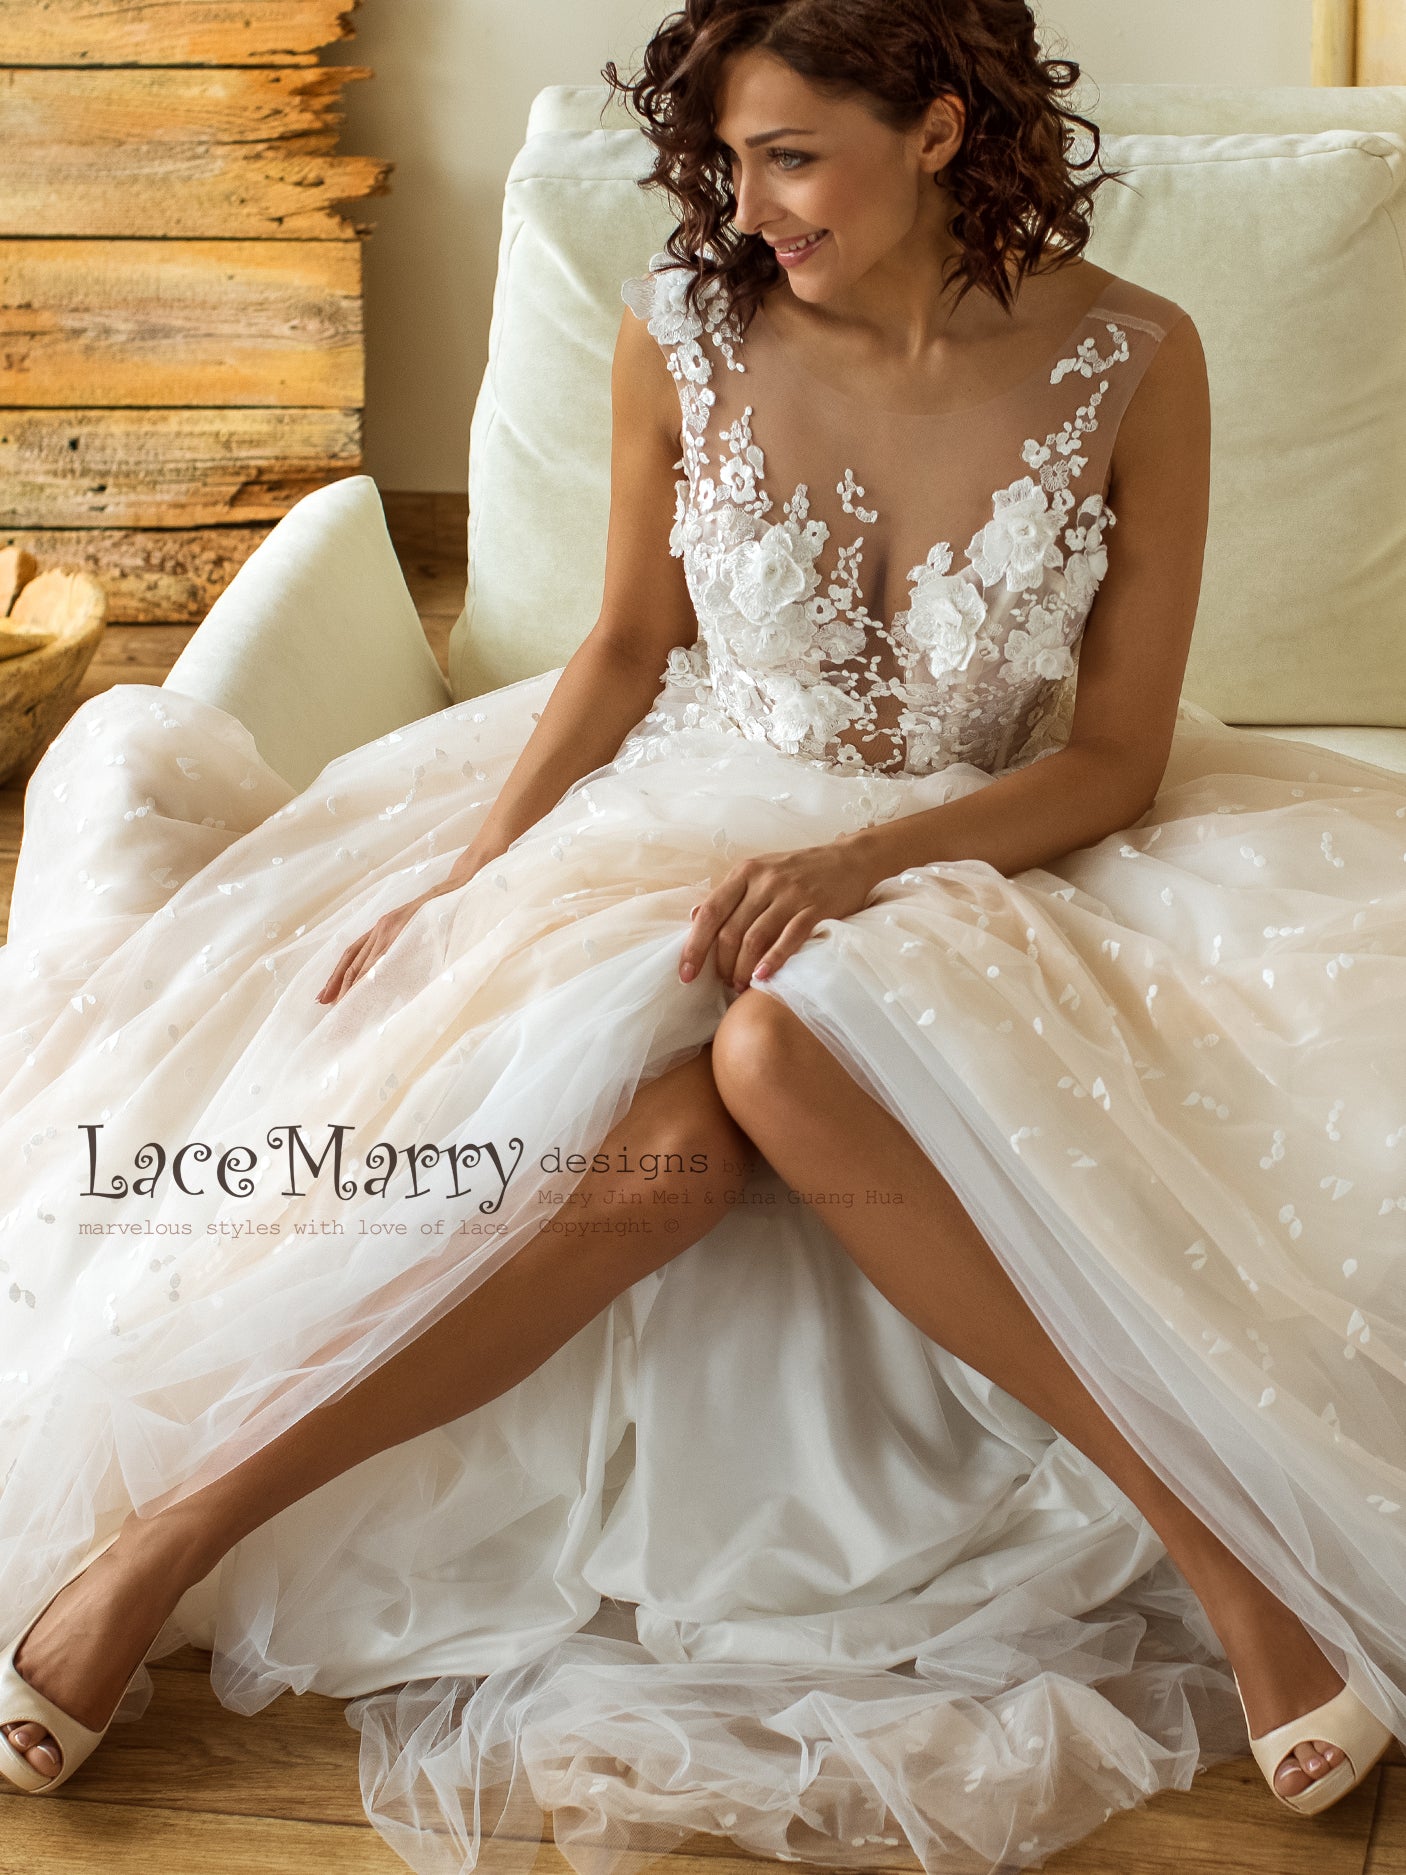 3D Flowers Wedding Dress in A-Line Style and with Hand Beading - LaceMarry